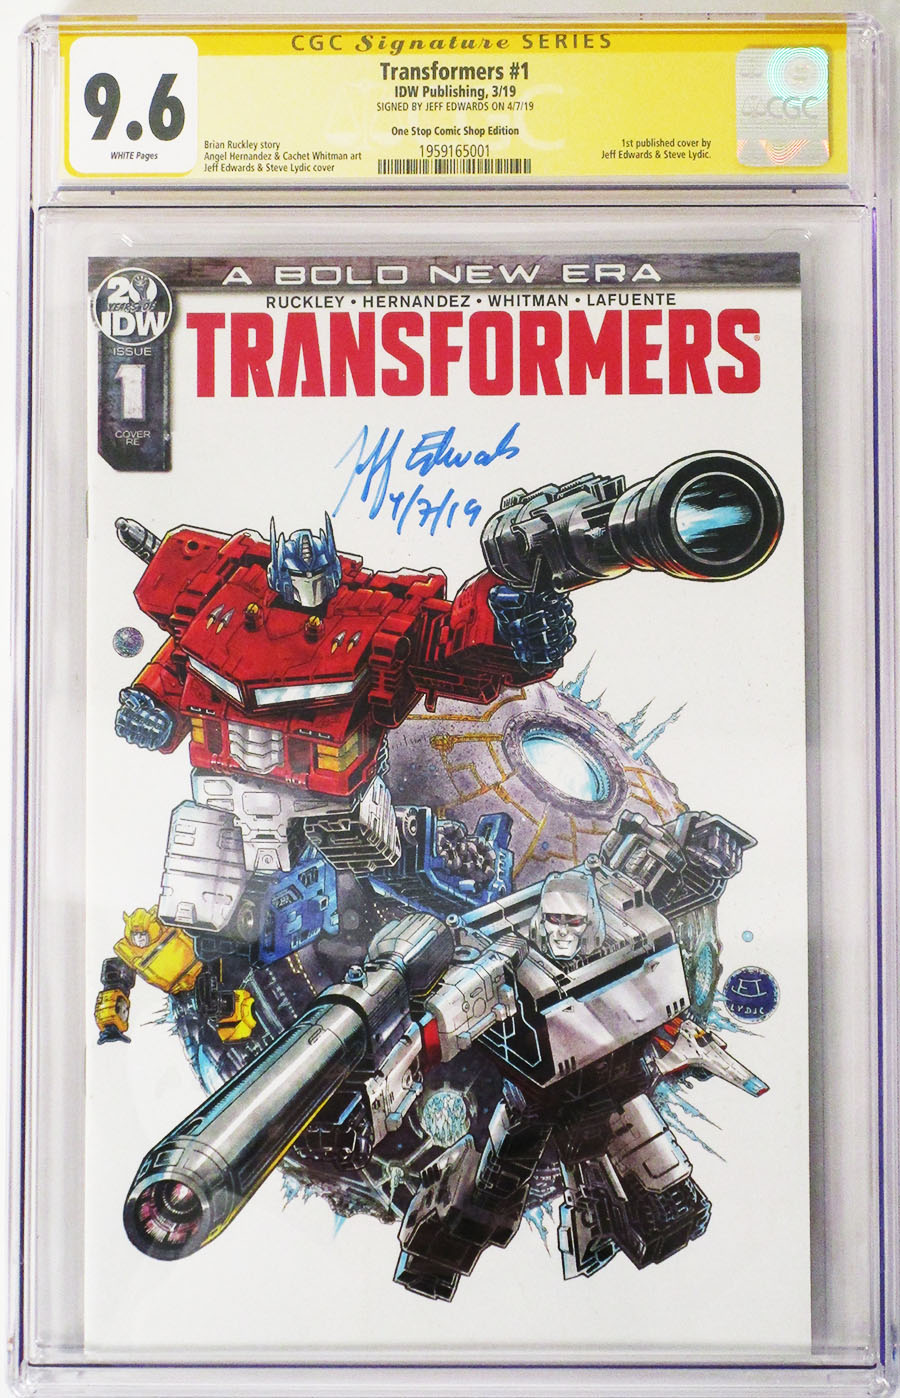 Transformers Vol 4 #1 Cover H CGC 9.6 One Stop Shop Edition Signed by Jeff Edwards